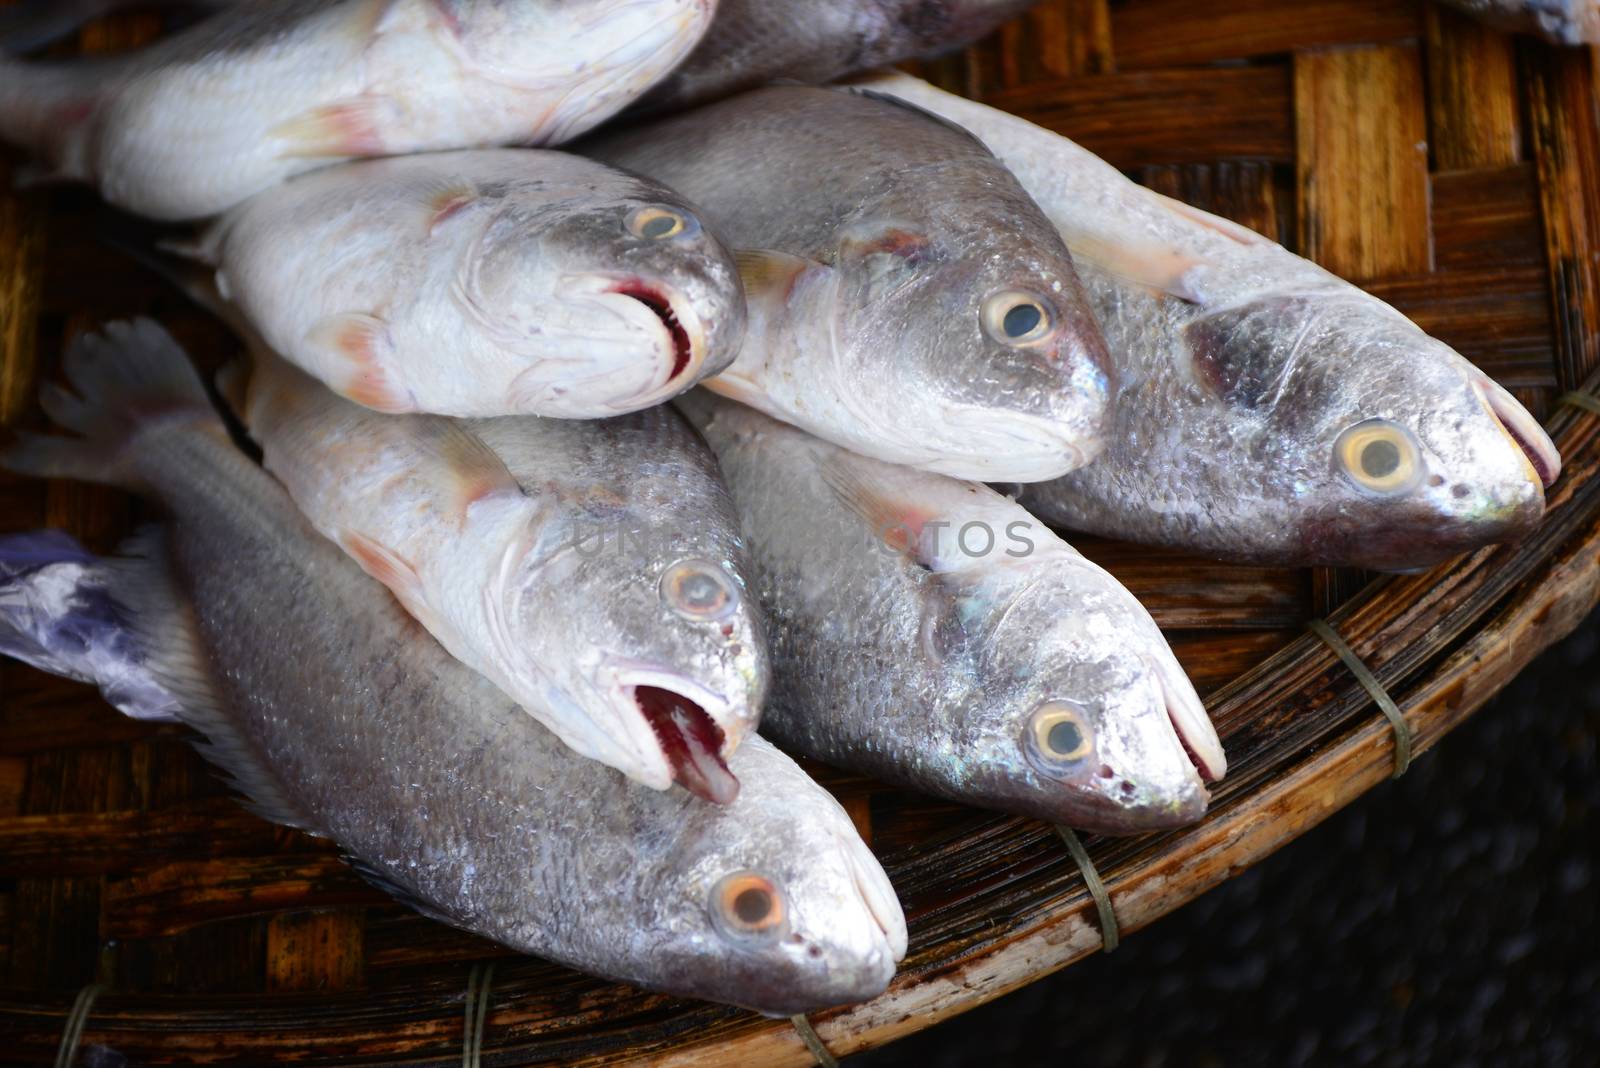 croaker fish Sell in fresh seafood marke by ideation90